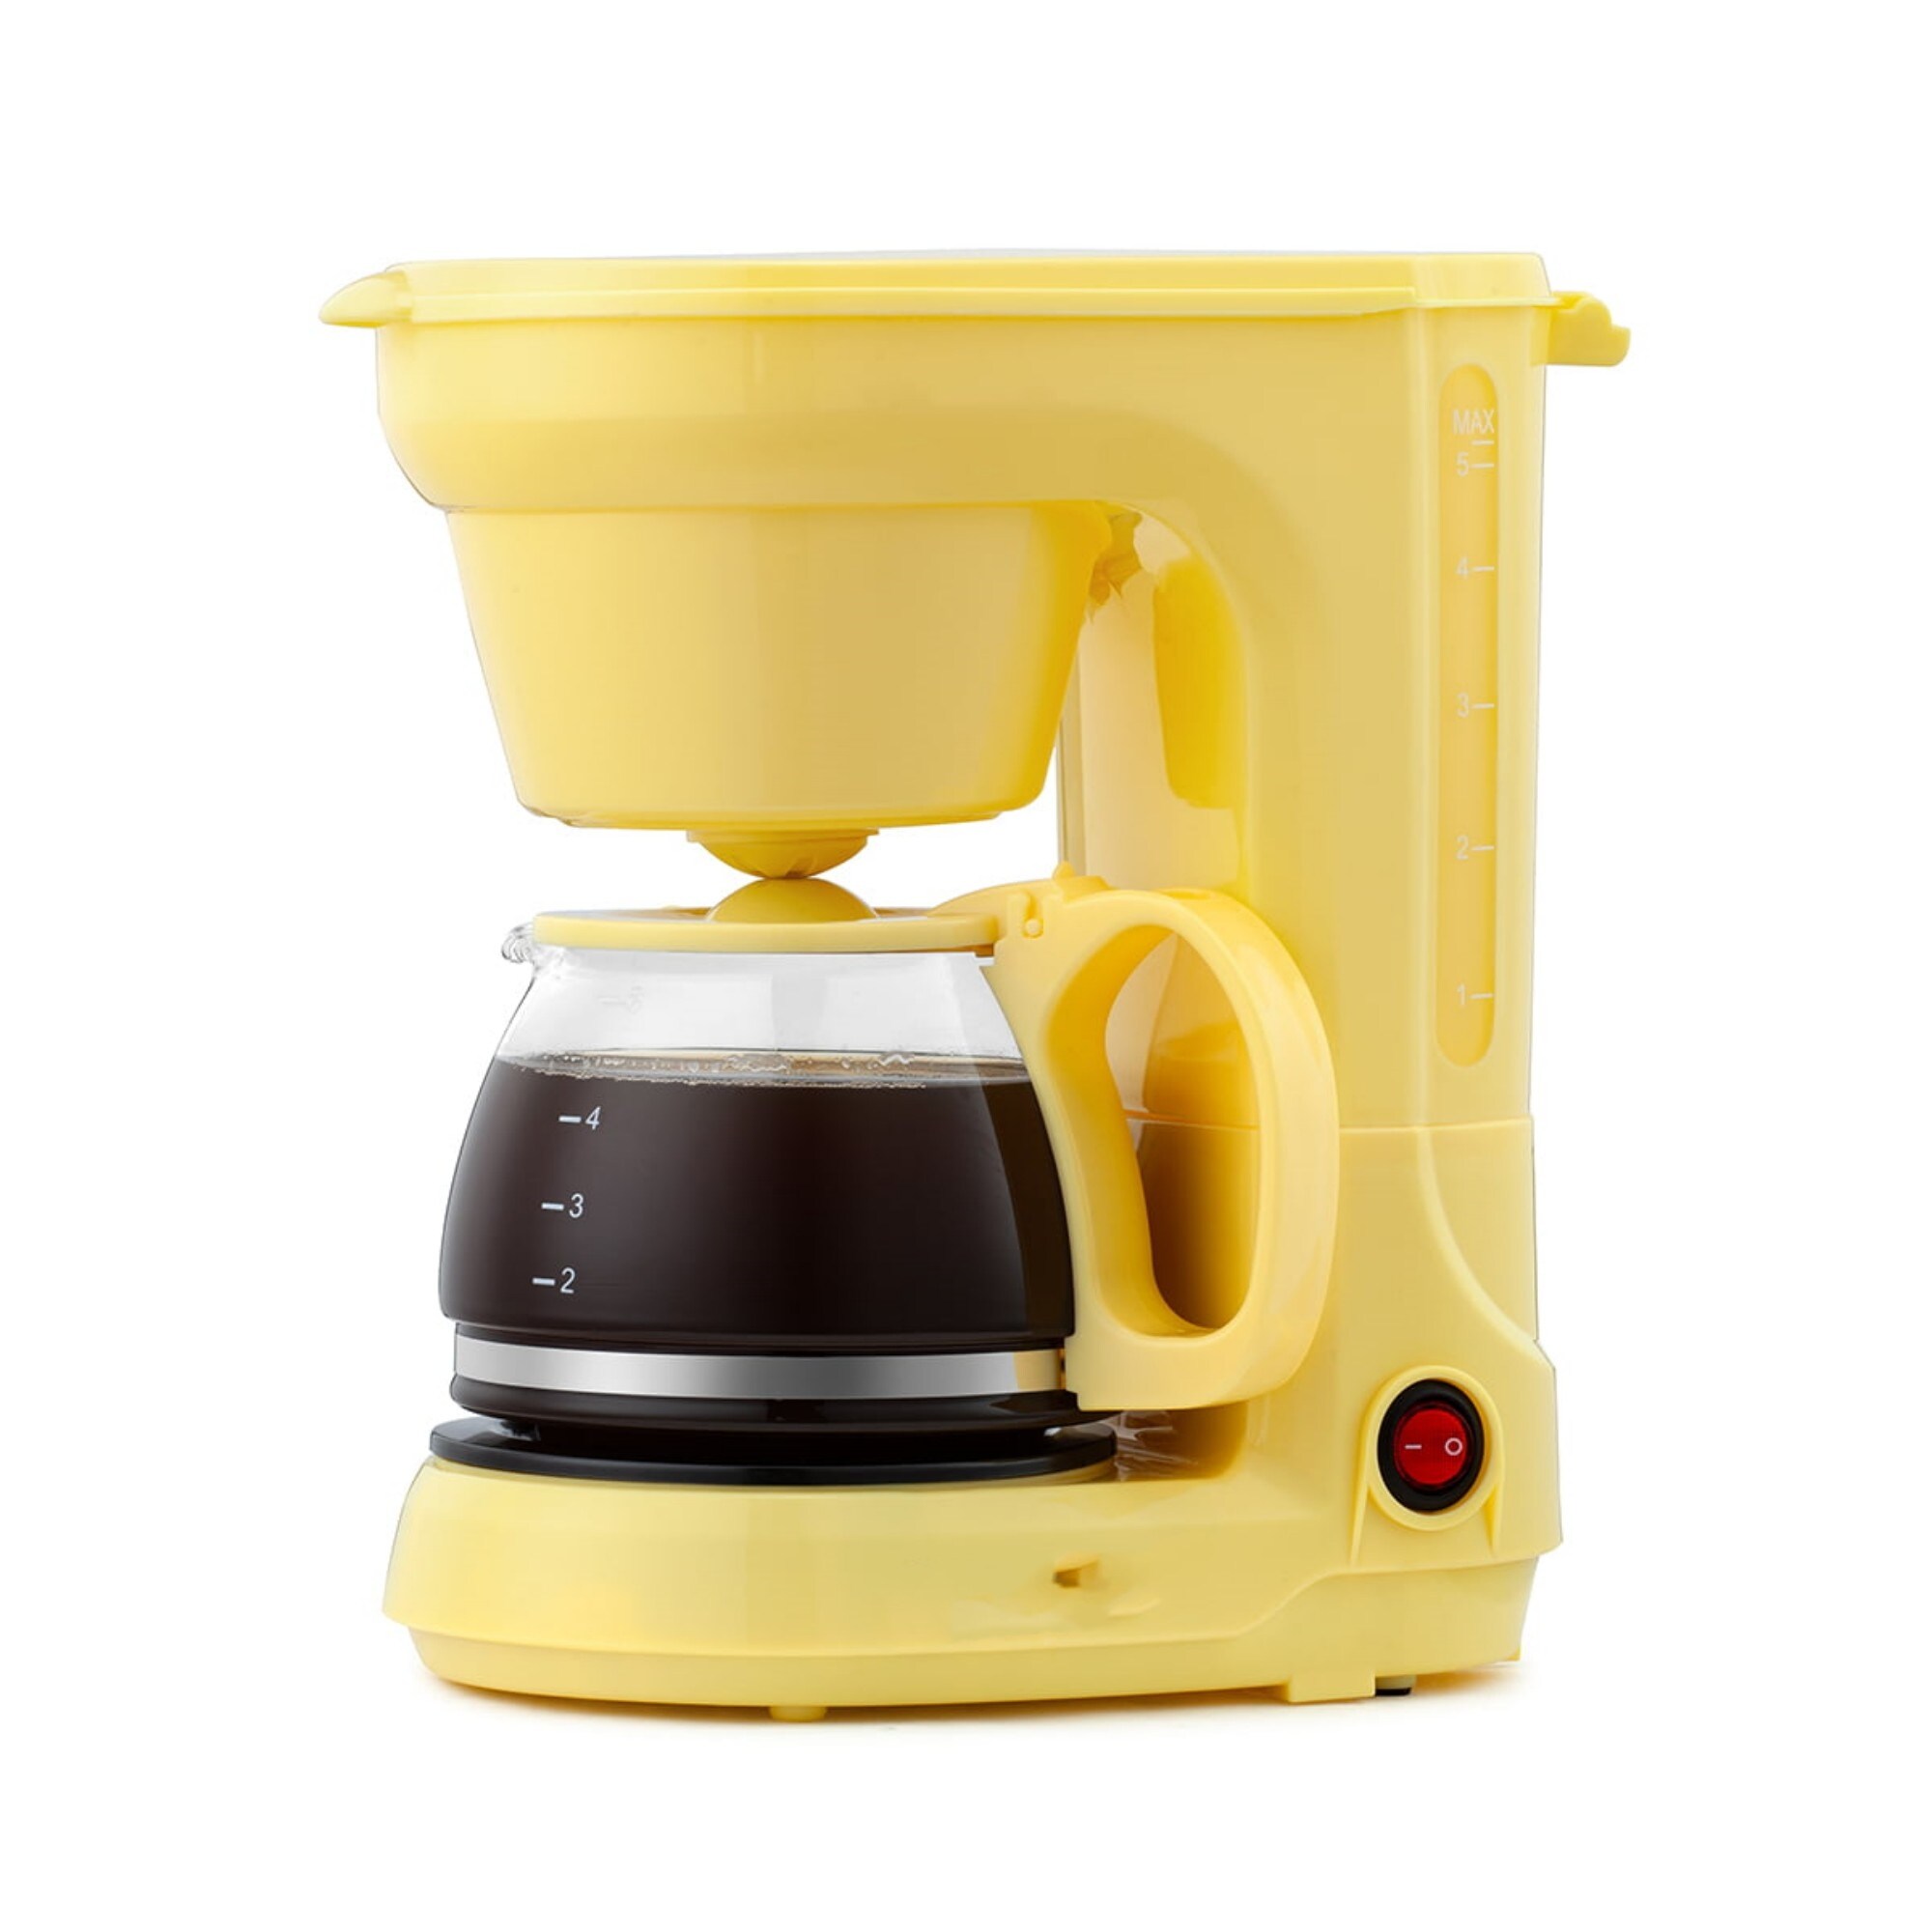 https://ak1.ostkcdn.com/images/products/is/images/direct/1b925c0177b41a6b54dace9fc5767cc2bf6eb5da/5CUP-Coffee-Maker---Space-Saving-Design%2C-Auto-Pause-and-Serve%2C-Removable-Filter-Basket%2C-BLACK.jpg